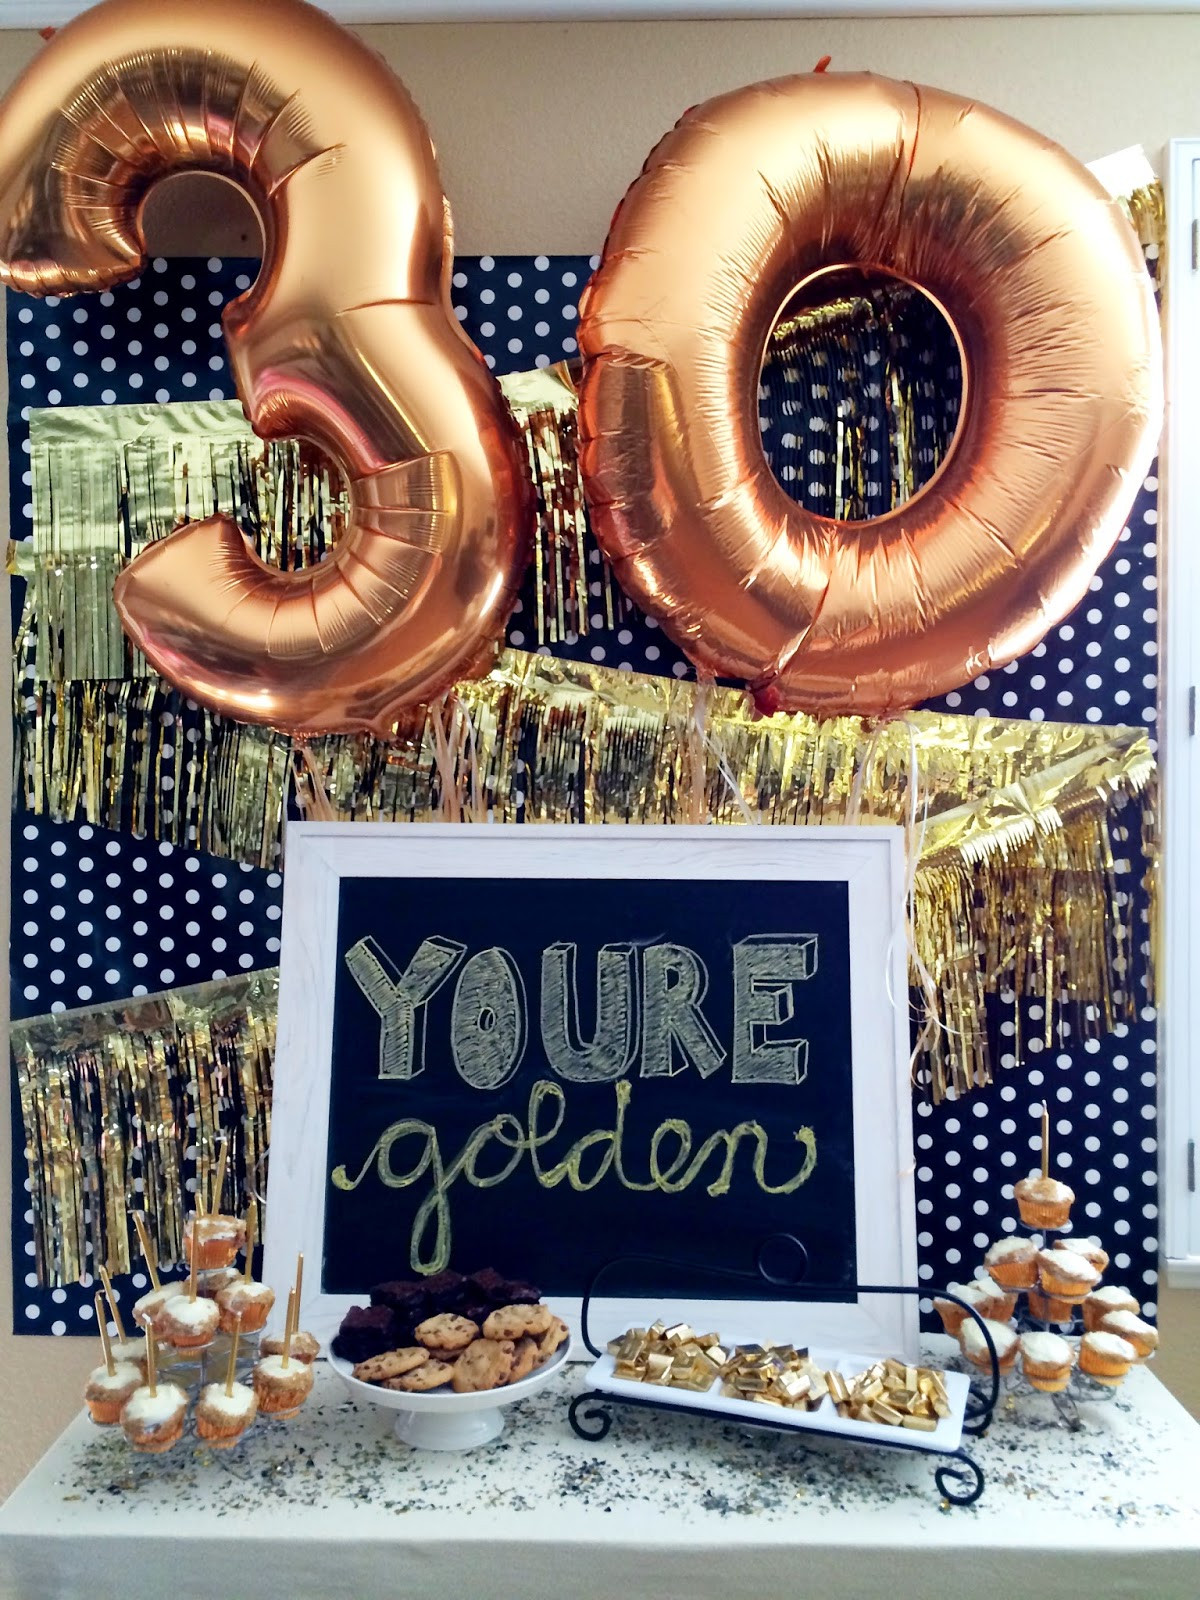 30 Birthday Party Idea
 7 Clever Themes for a Smashing 30th Birthday Party